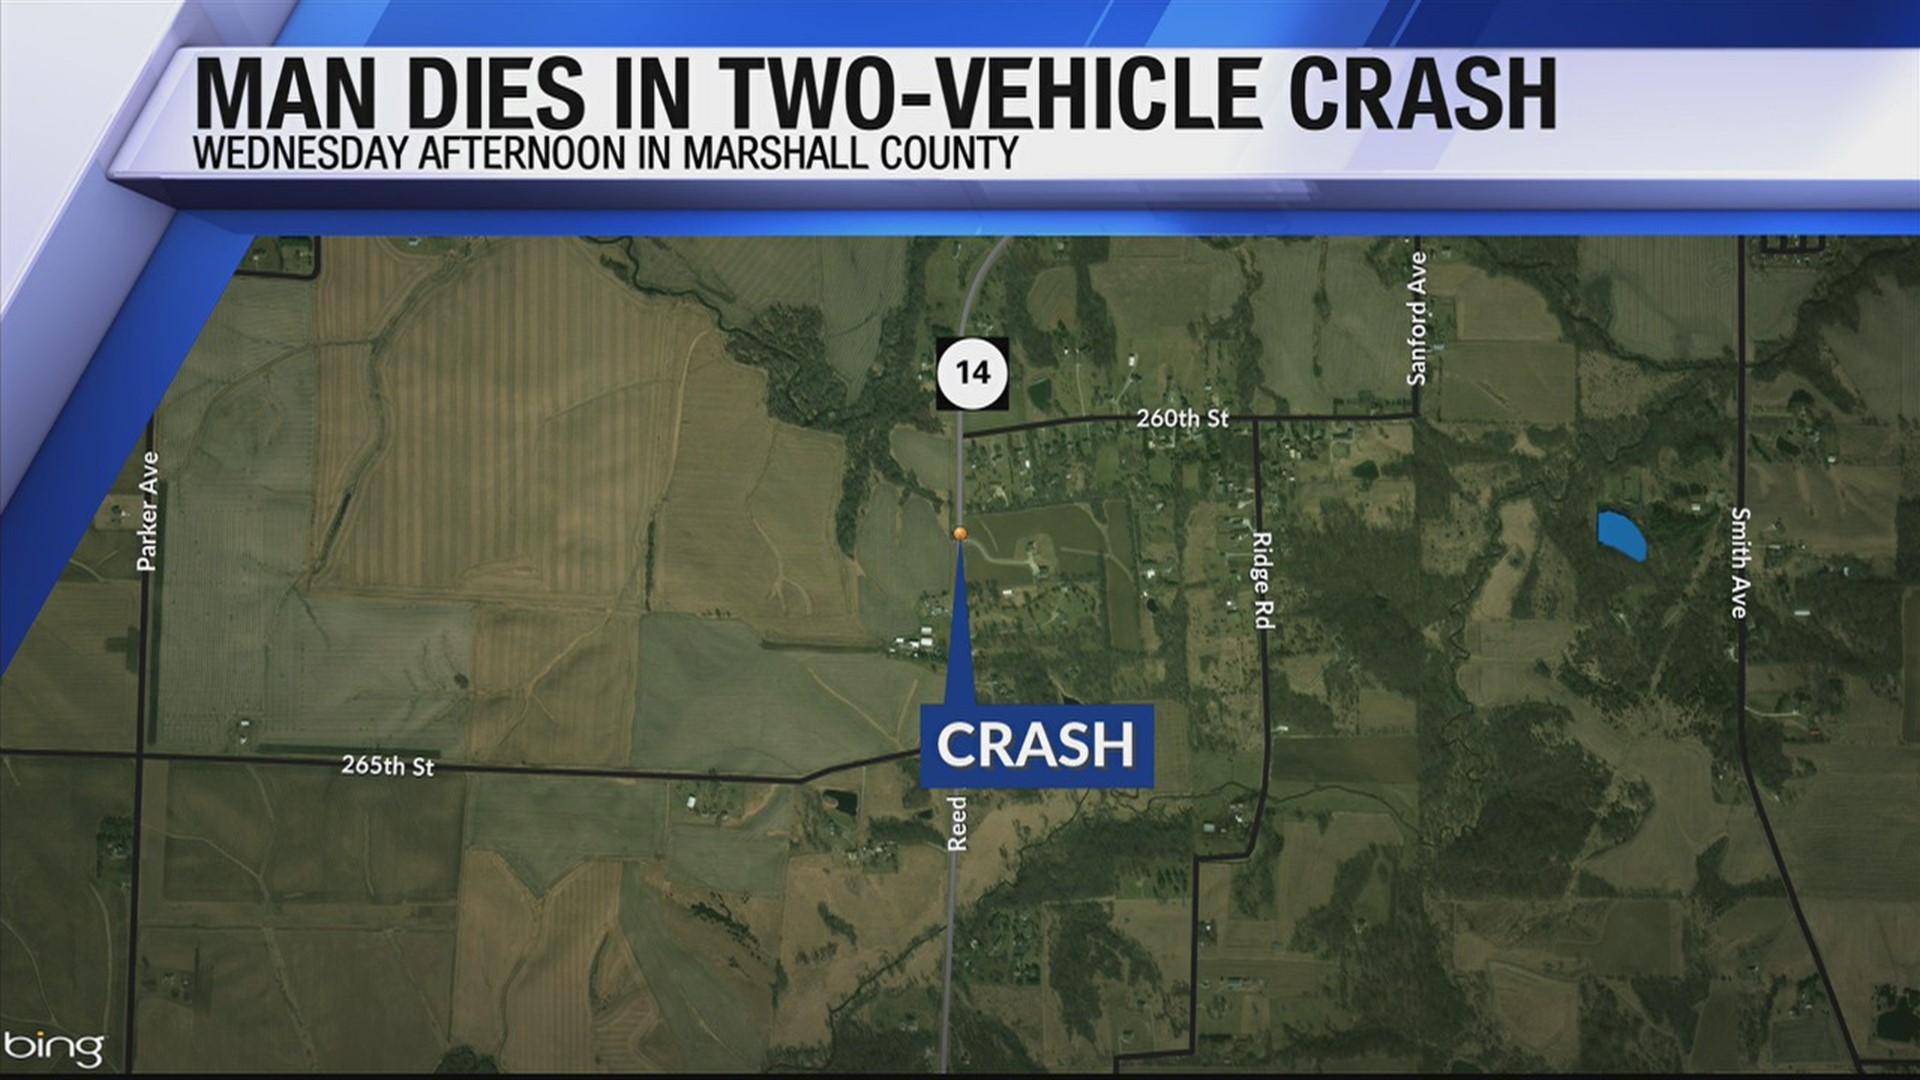 Man dies in two-car crash Wednesday afternoon in Marshall County.